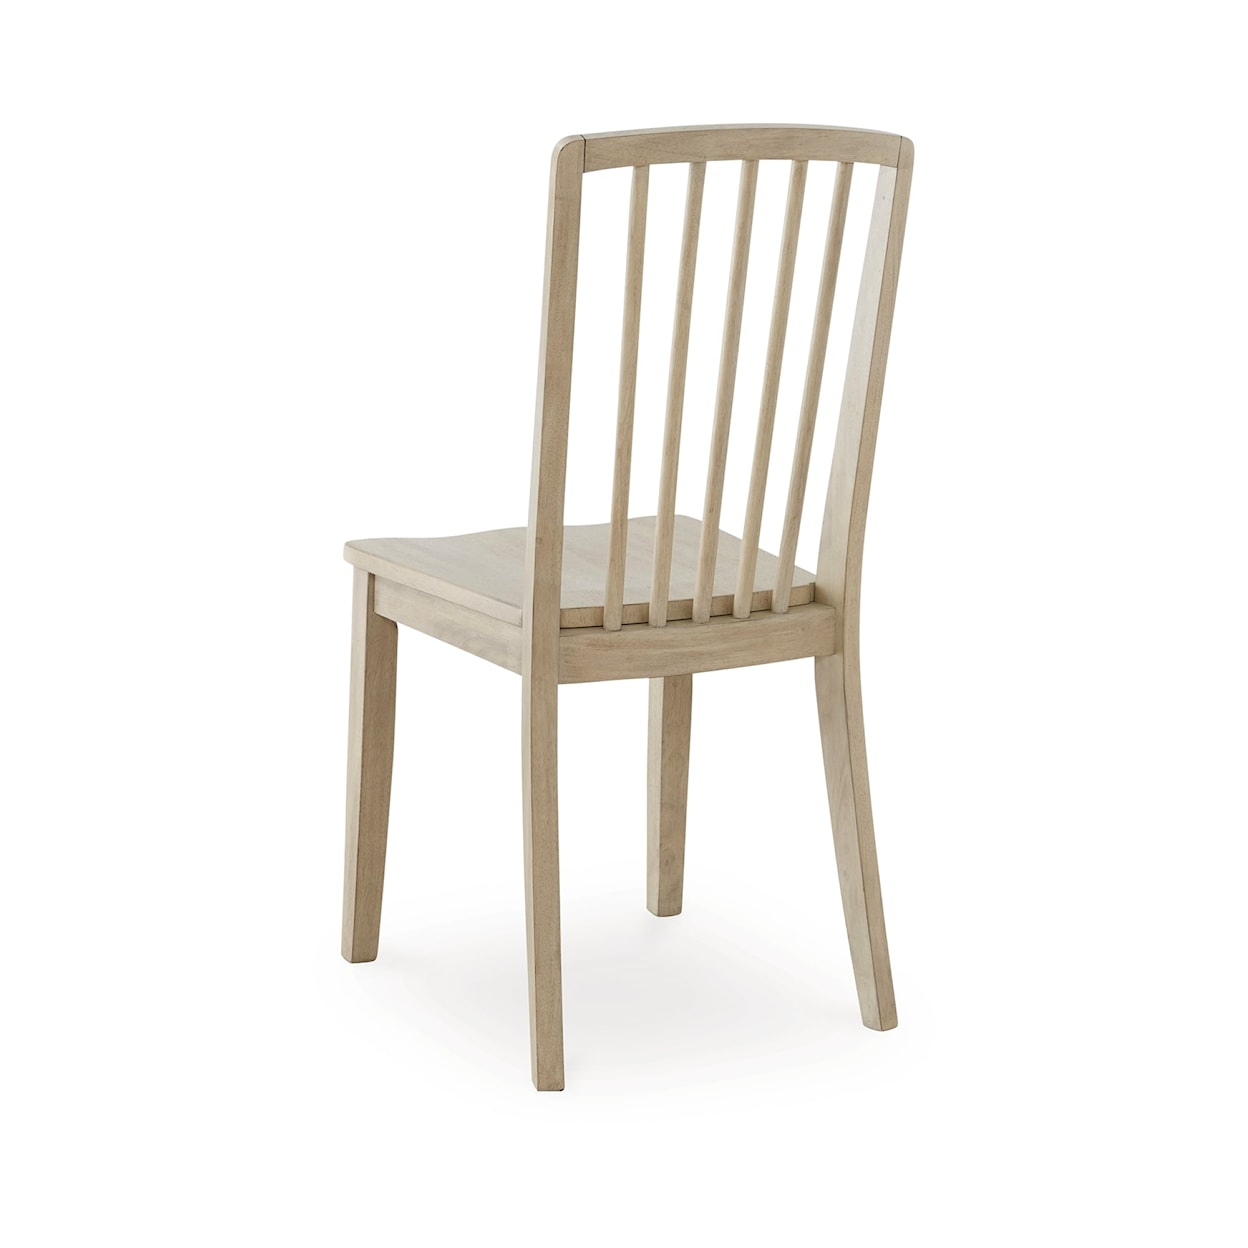 Signature Design by Ashley Gleanville Dining Chair